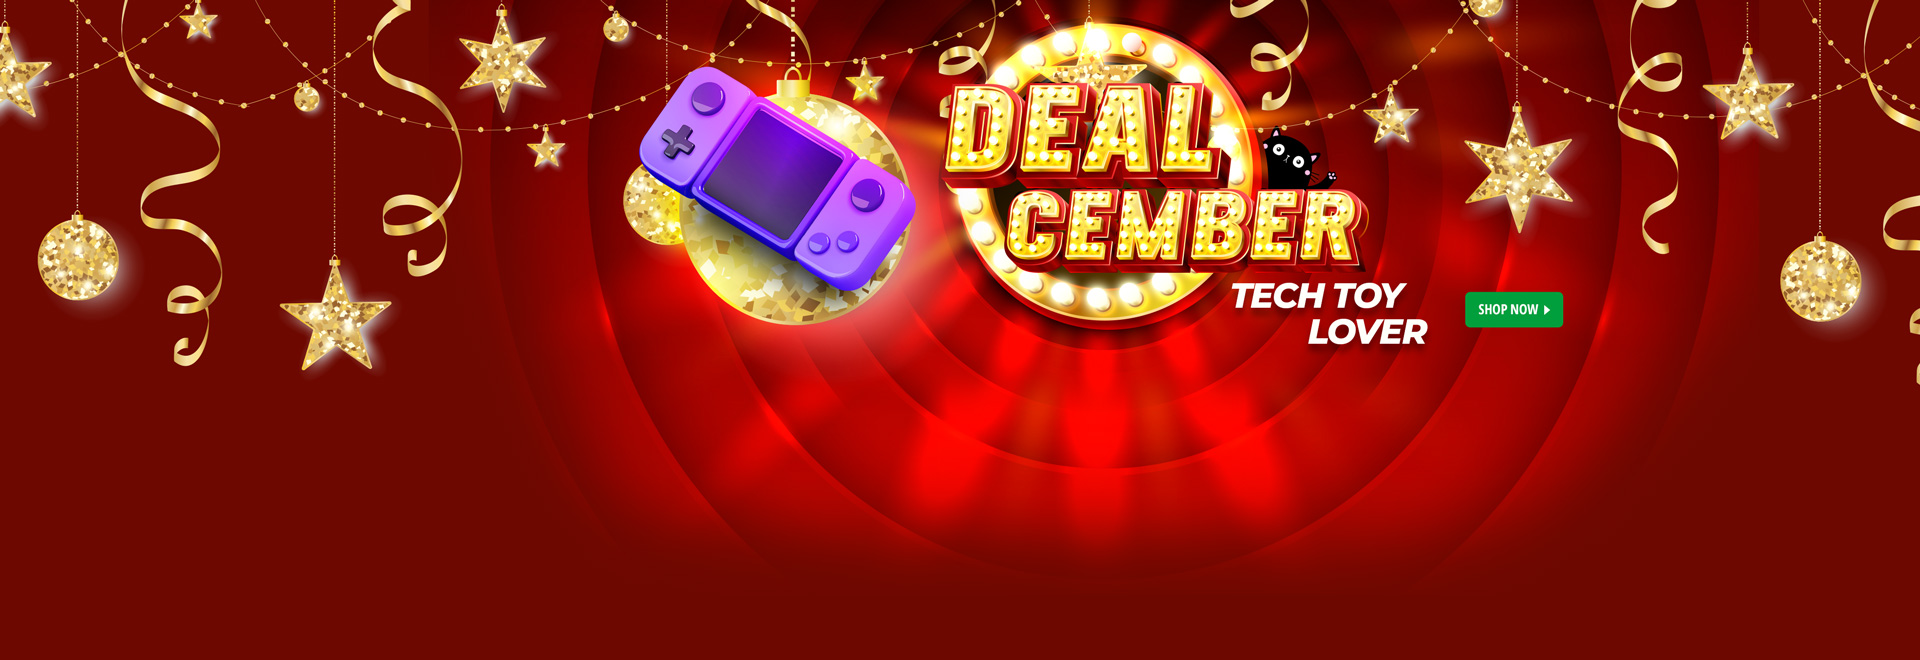 Deal-Cember Tech Toy Lover